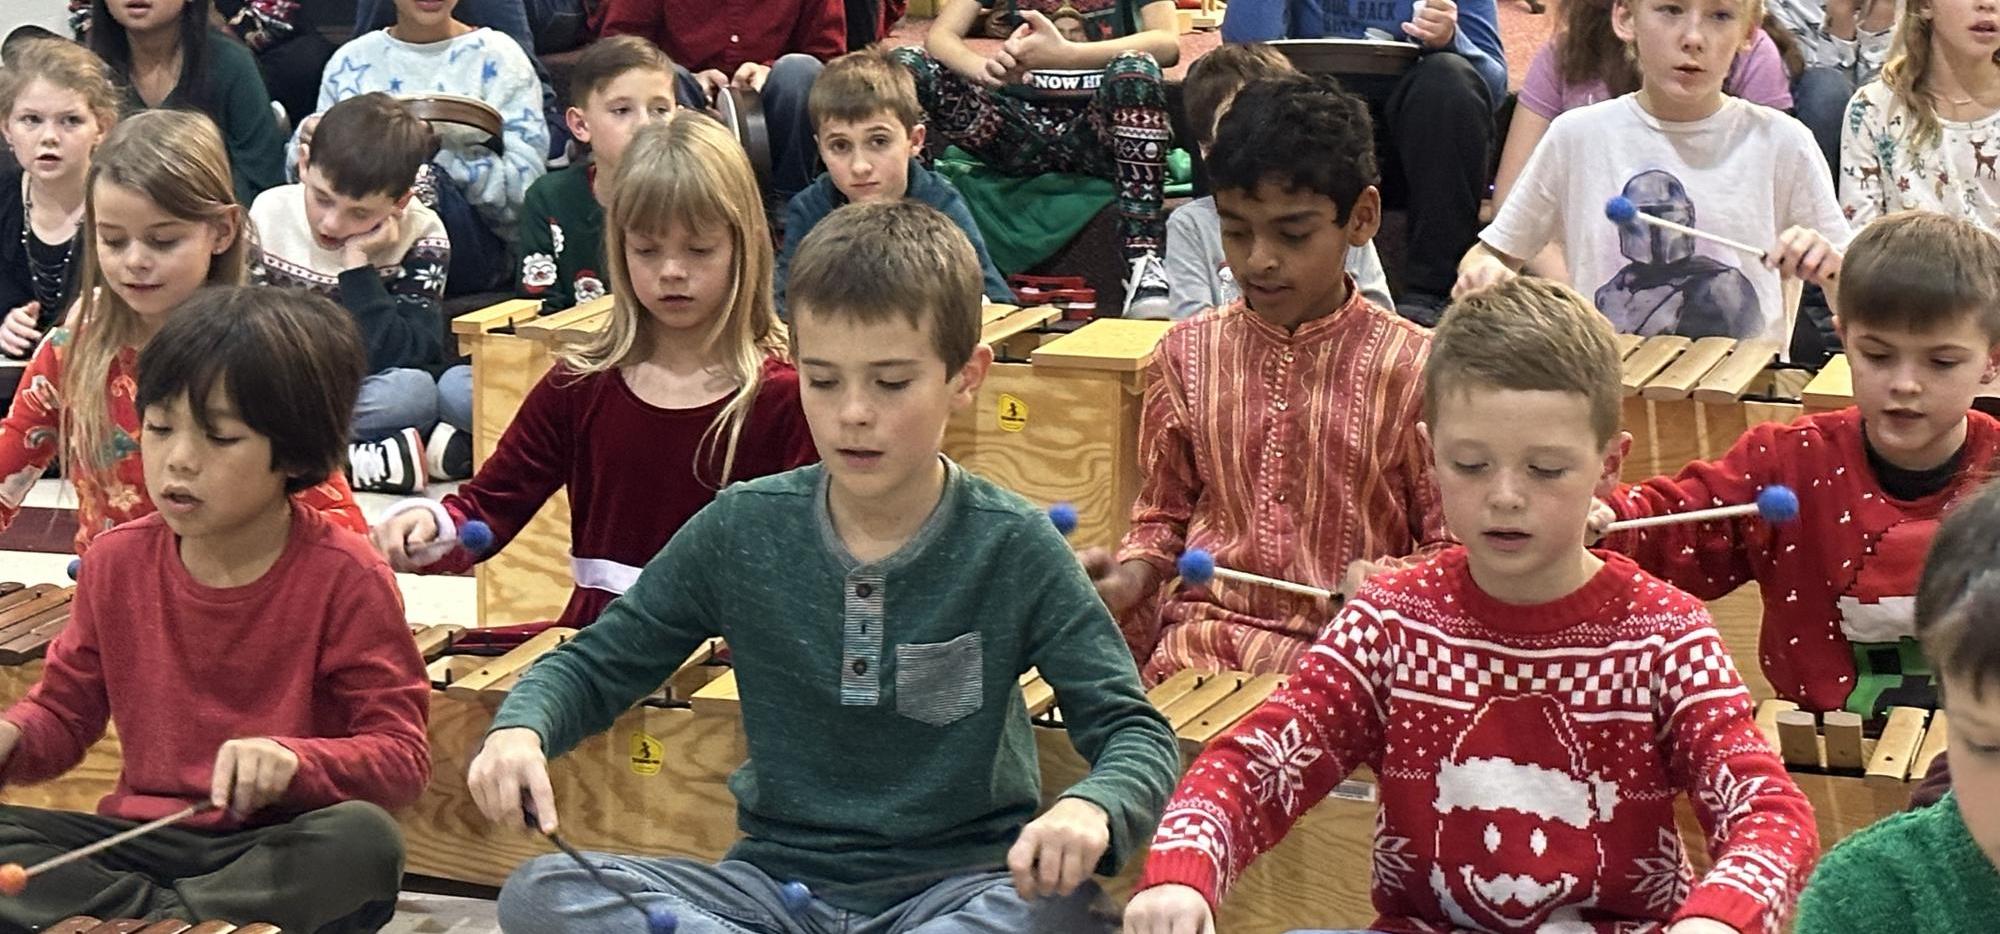 children playing xylophones and Orff instruments